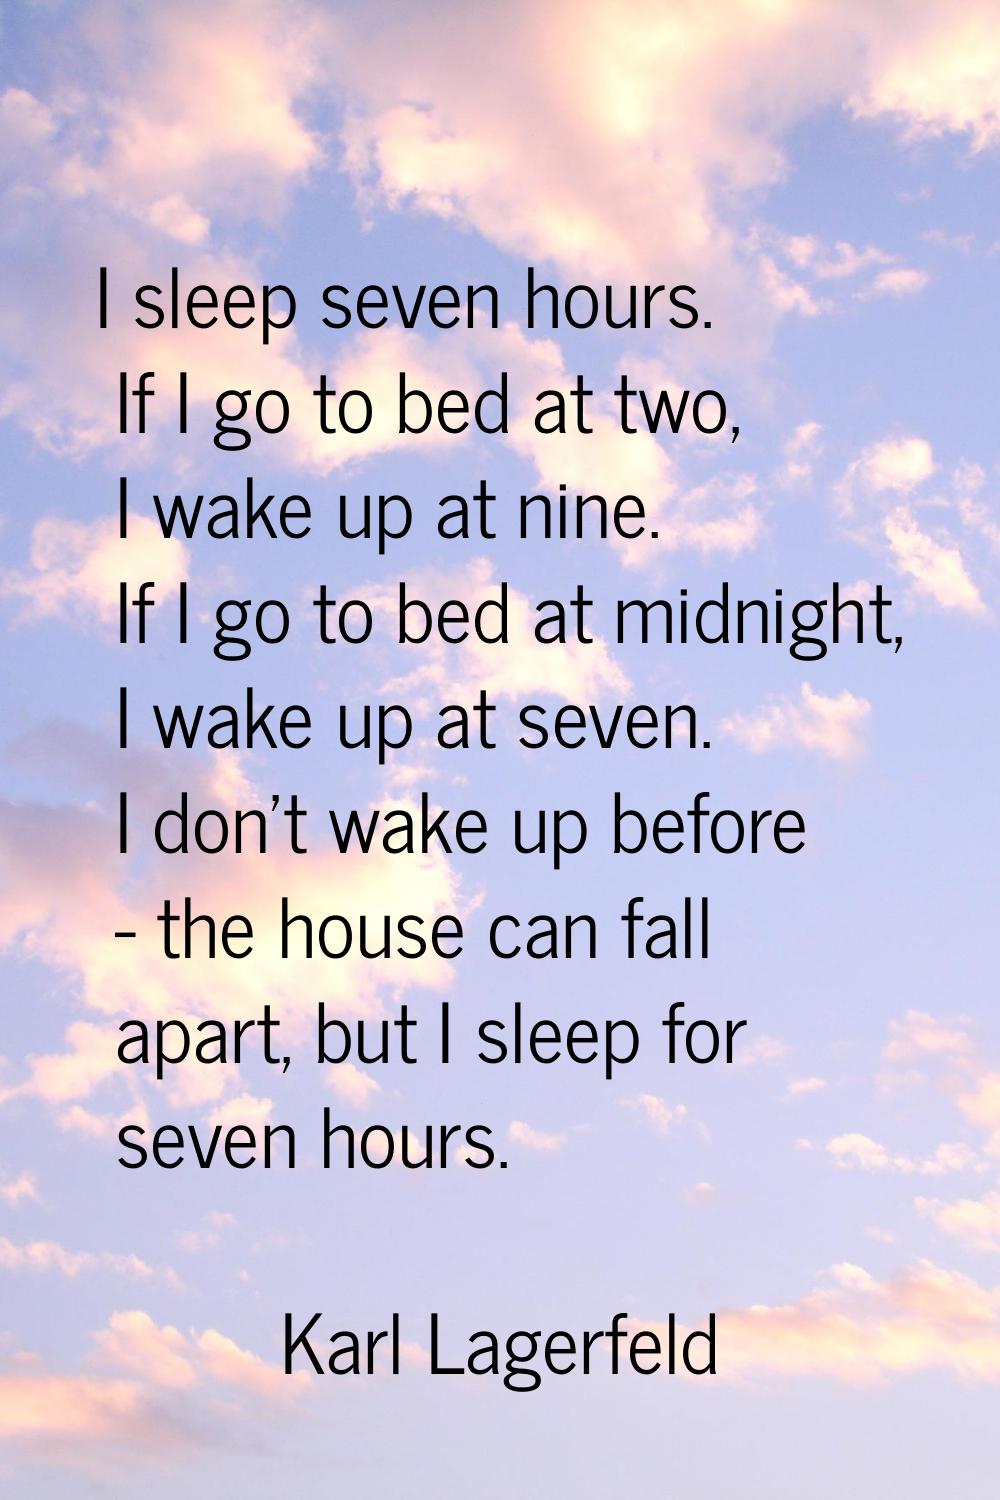 I sleep seven hours. If I go to bed at two, I wake up at nine. If I go to bed at midnight, I wake u